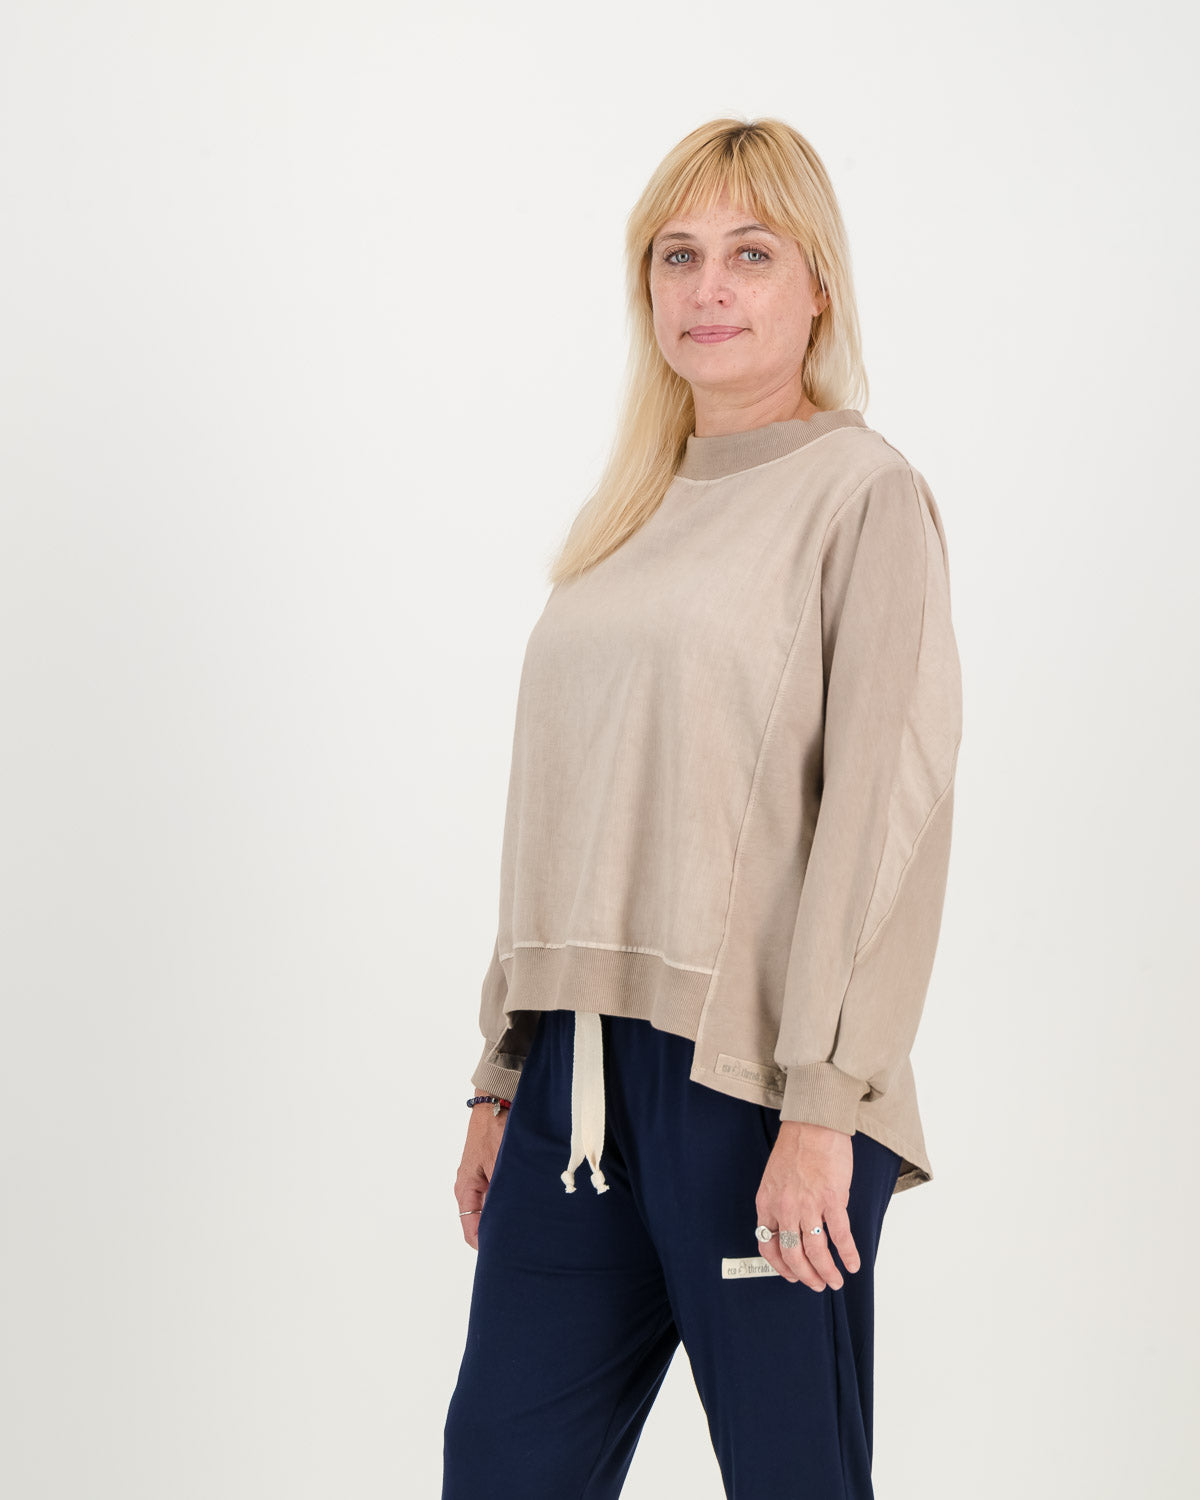 Batwing Overdyed stone Sweatshirt, back hem is dipped and longer than the front. Paired with black comfy pants